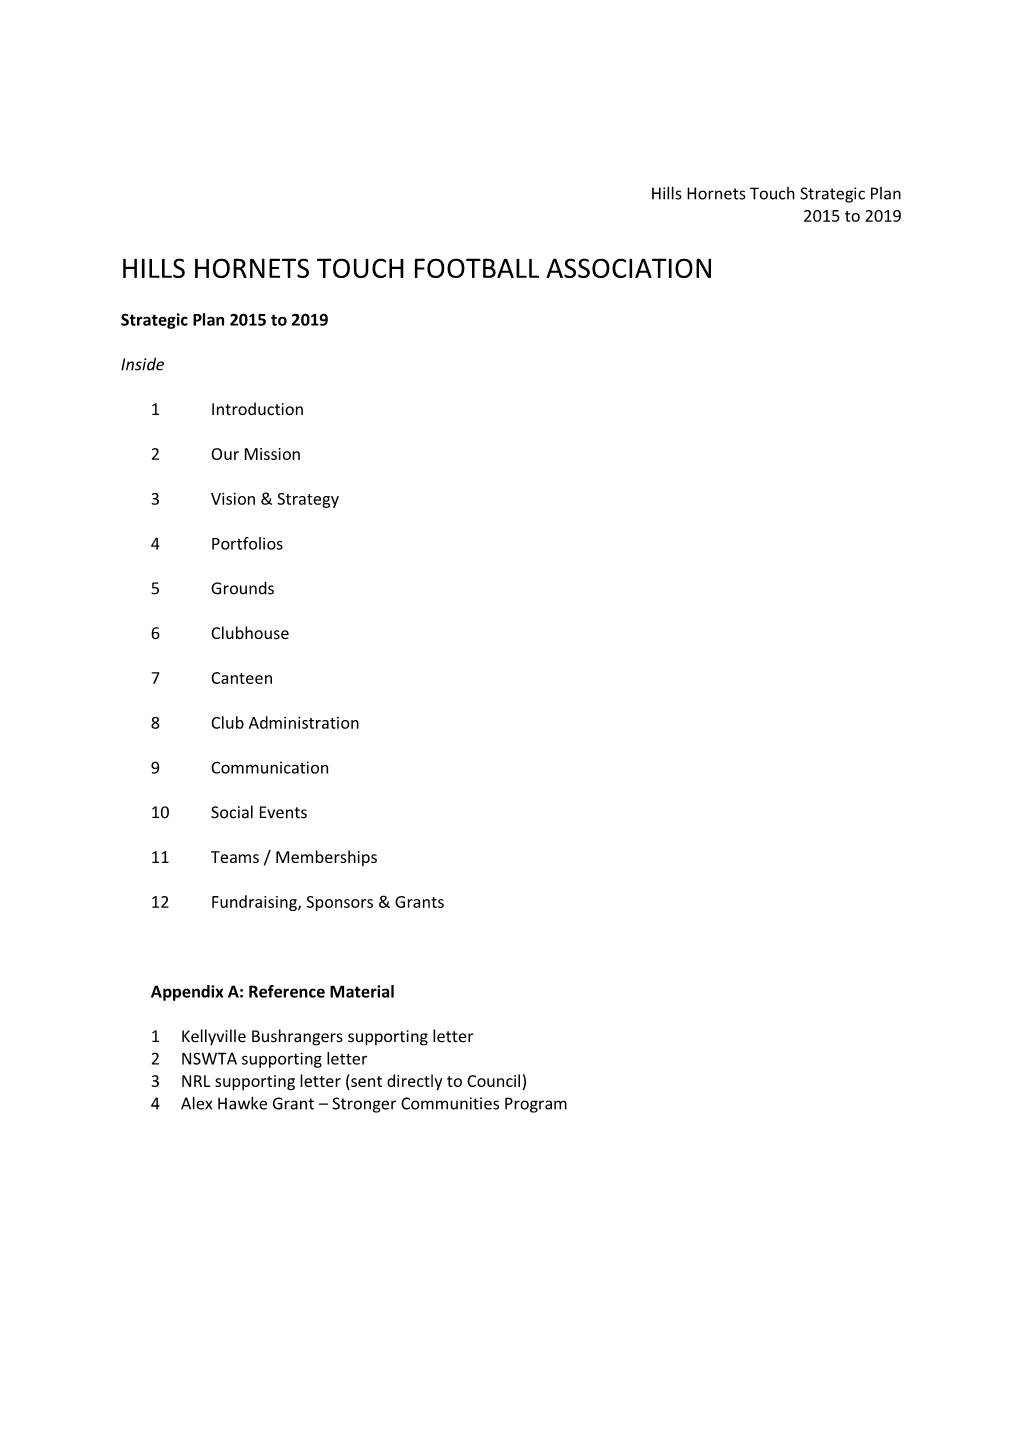 Hills Hornets Touch Strategic Plan 2015 to 2019